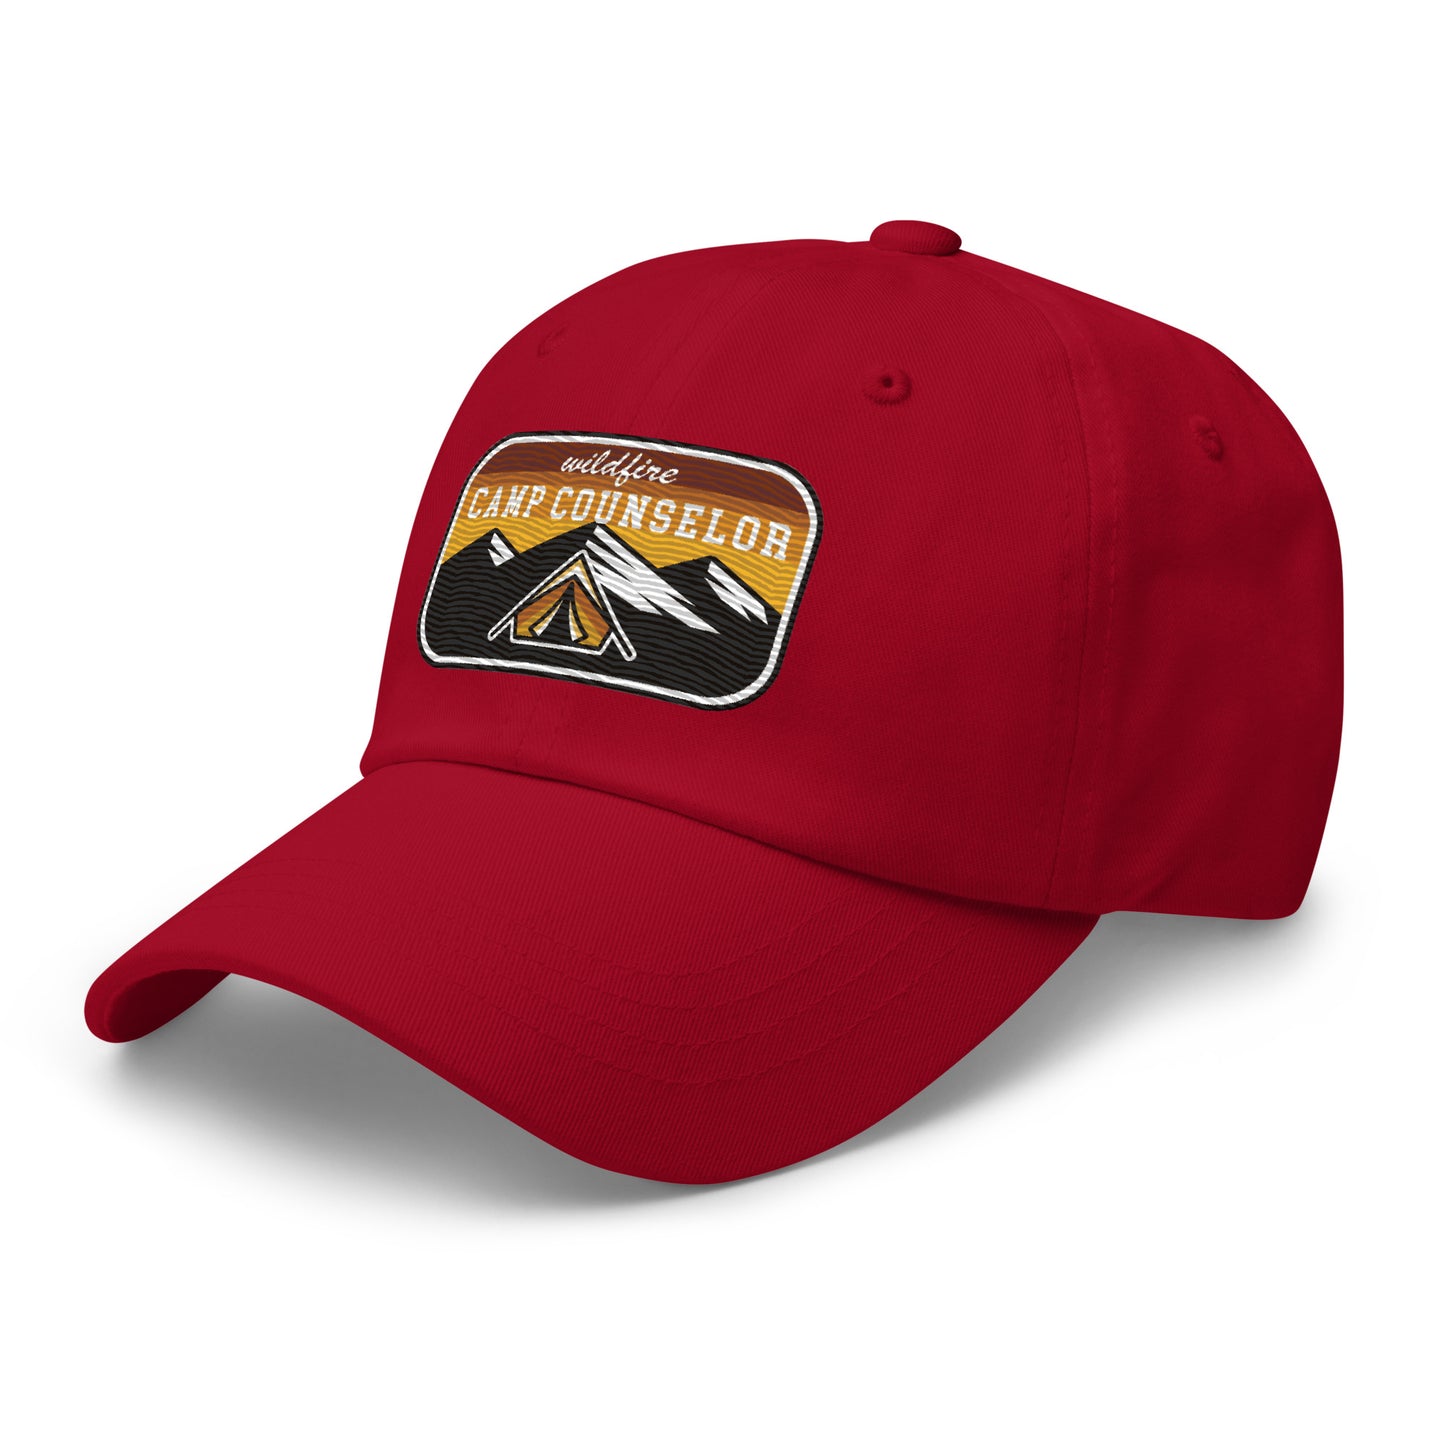 Wildfire Cigars embroidered dad hat in cranberry facing the left front